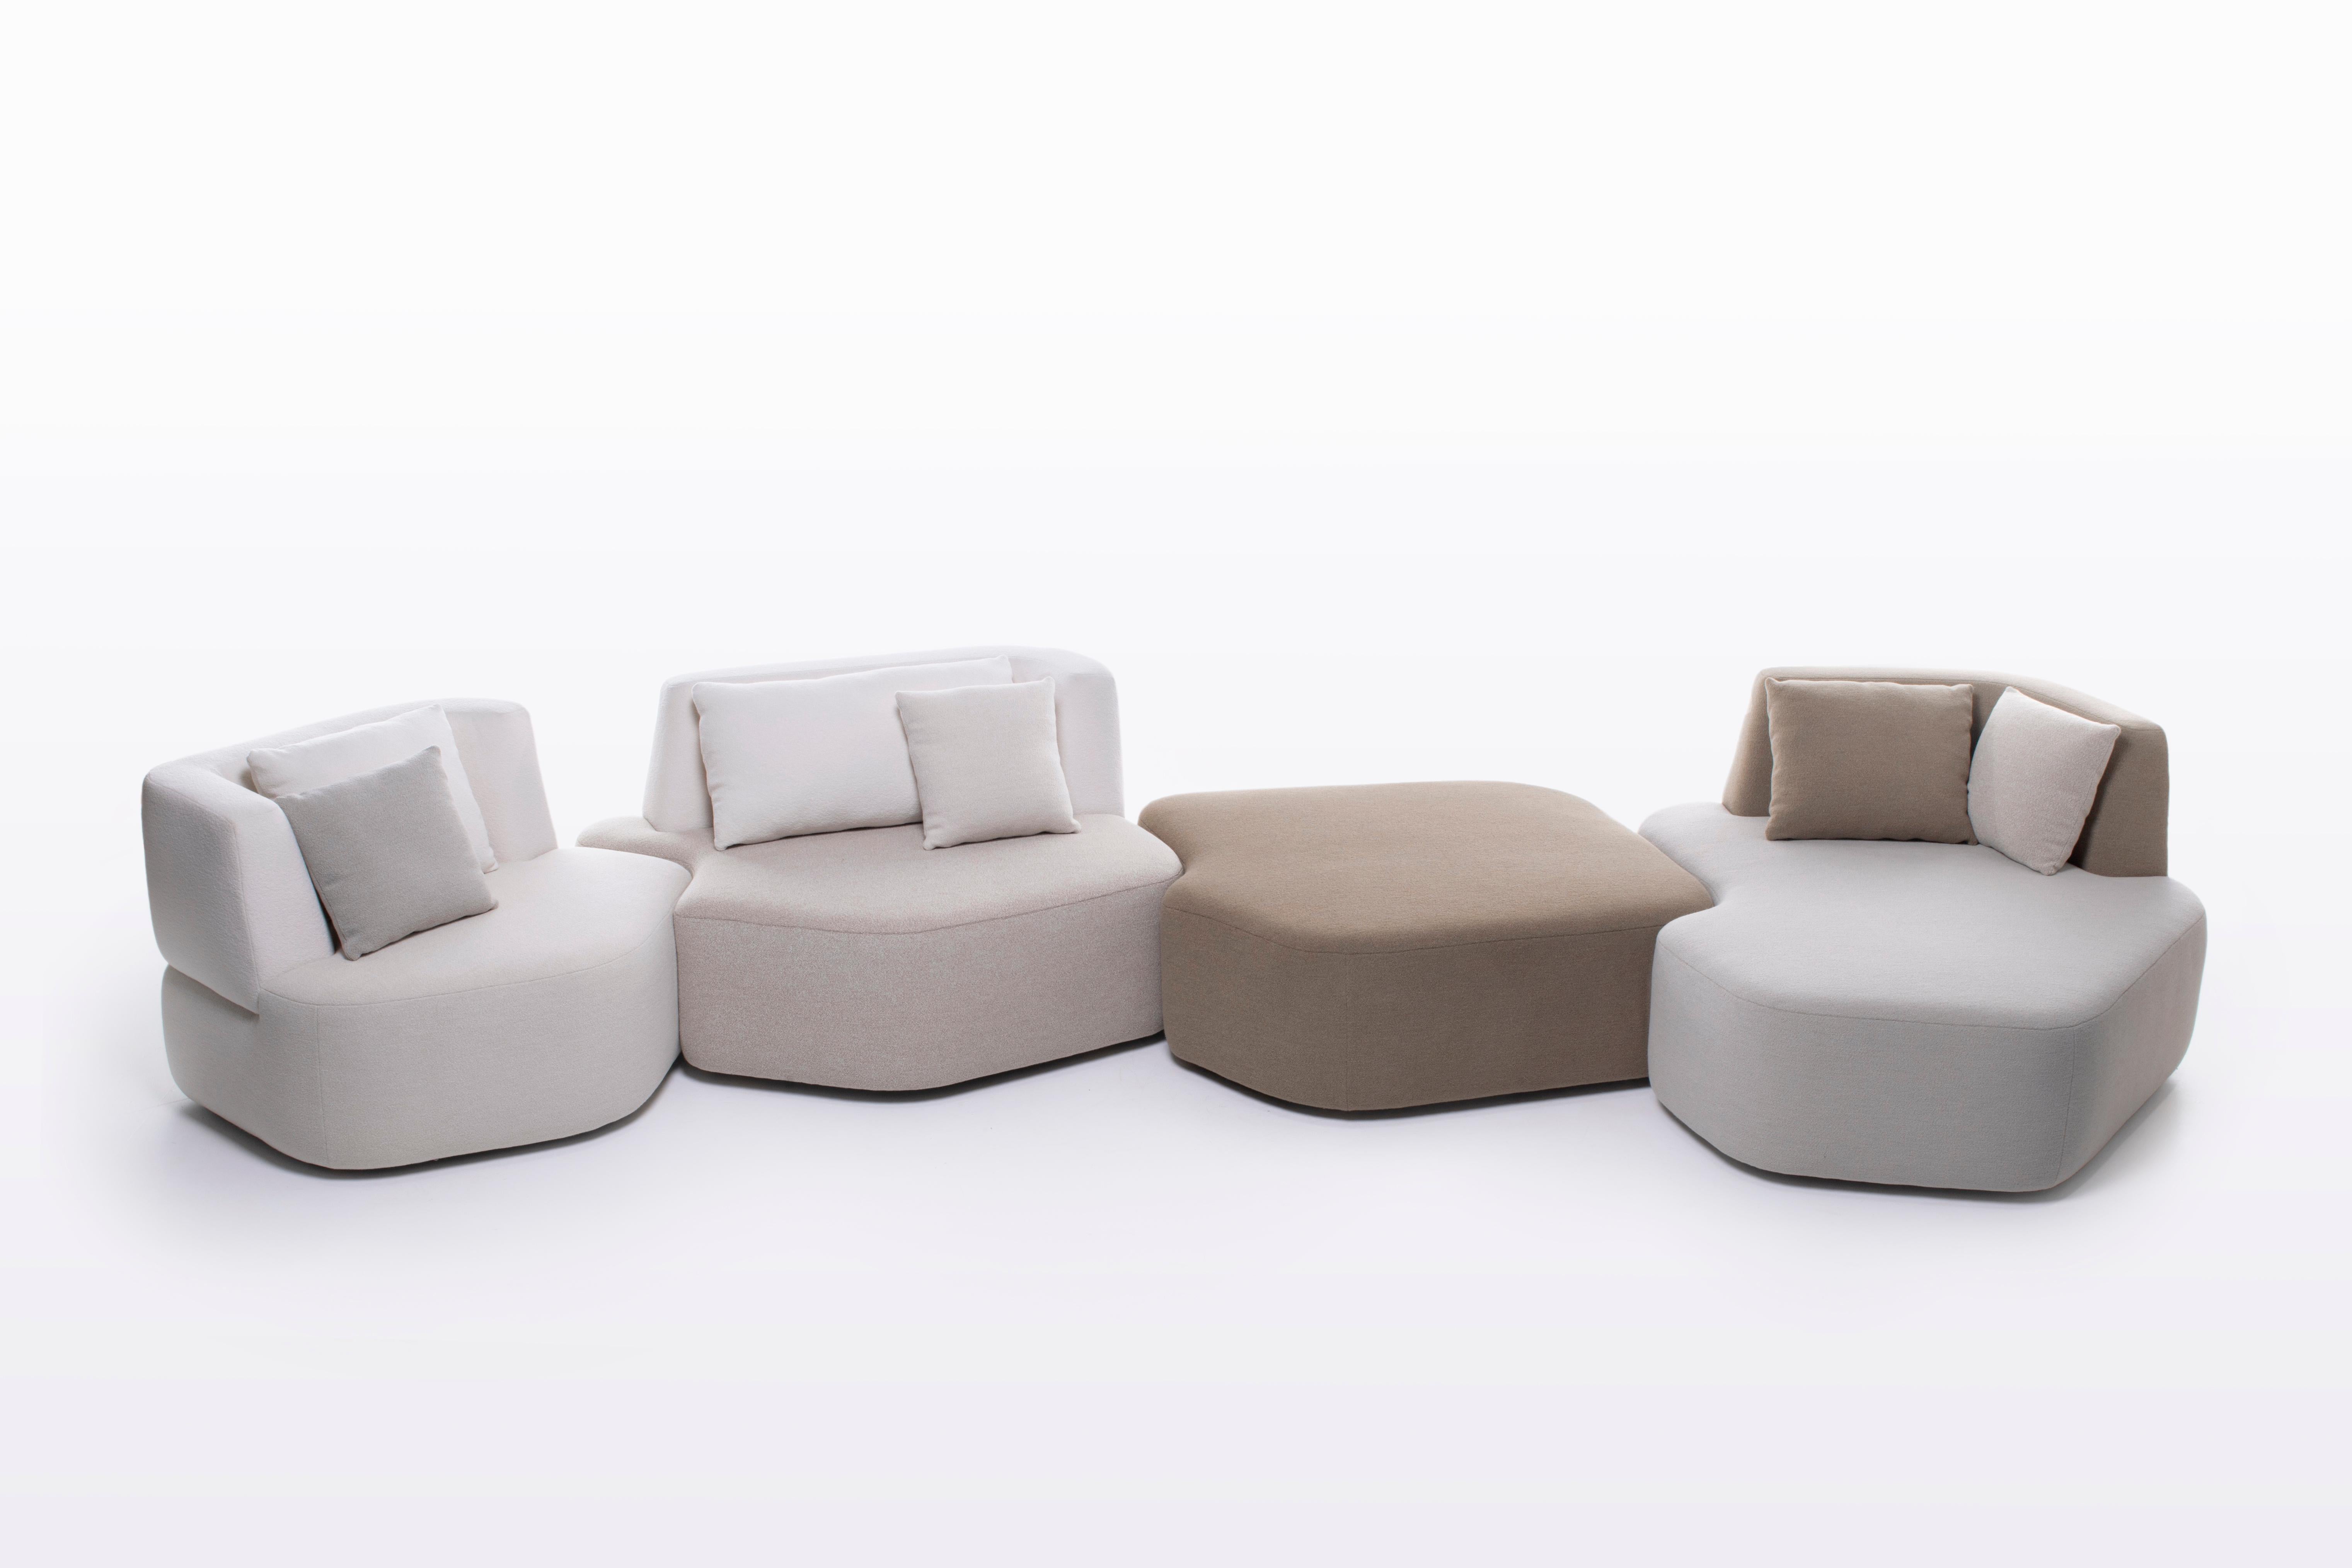 Pierre sofa was inspired by a photographic work Eric Gizard did in the summer of 2019 in Turkey. From white pebbles cleaned and rounded by the sea, he assembled some of them into abstract forms, joining together in organic articulation. Eric Gizard